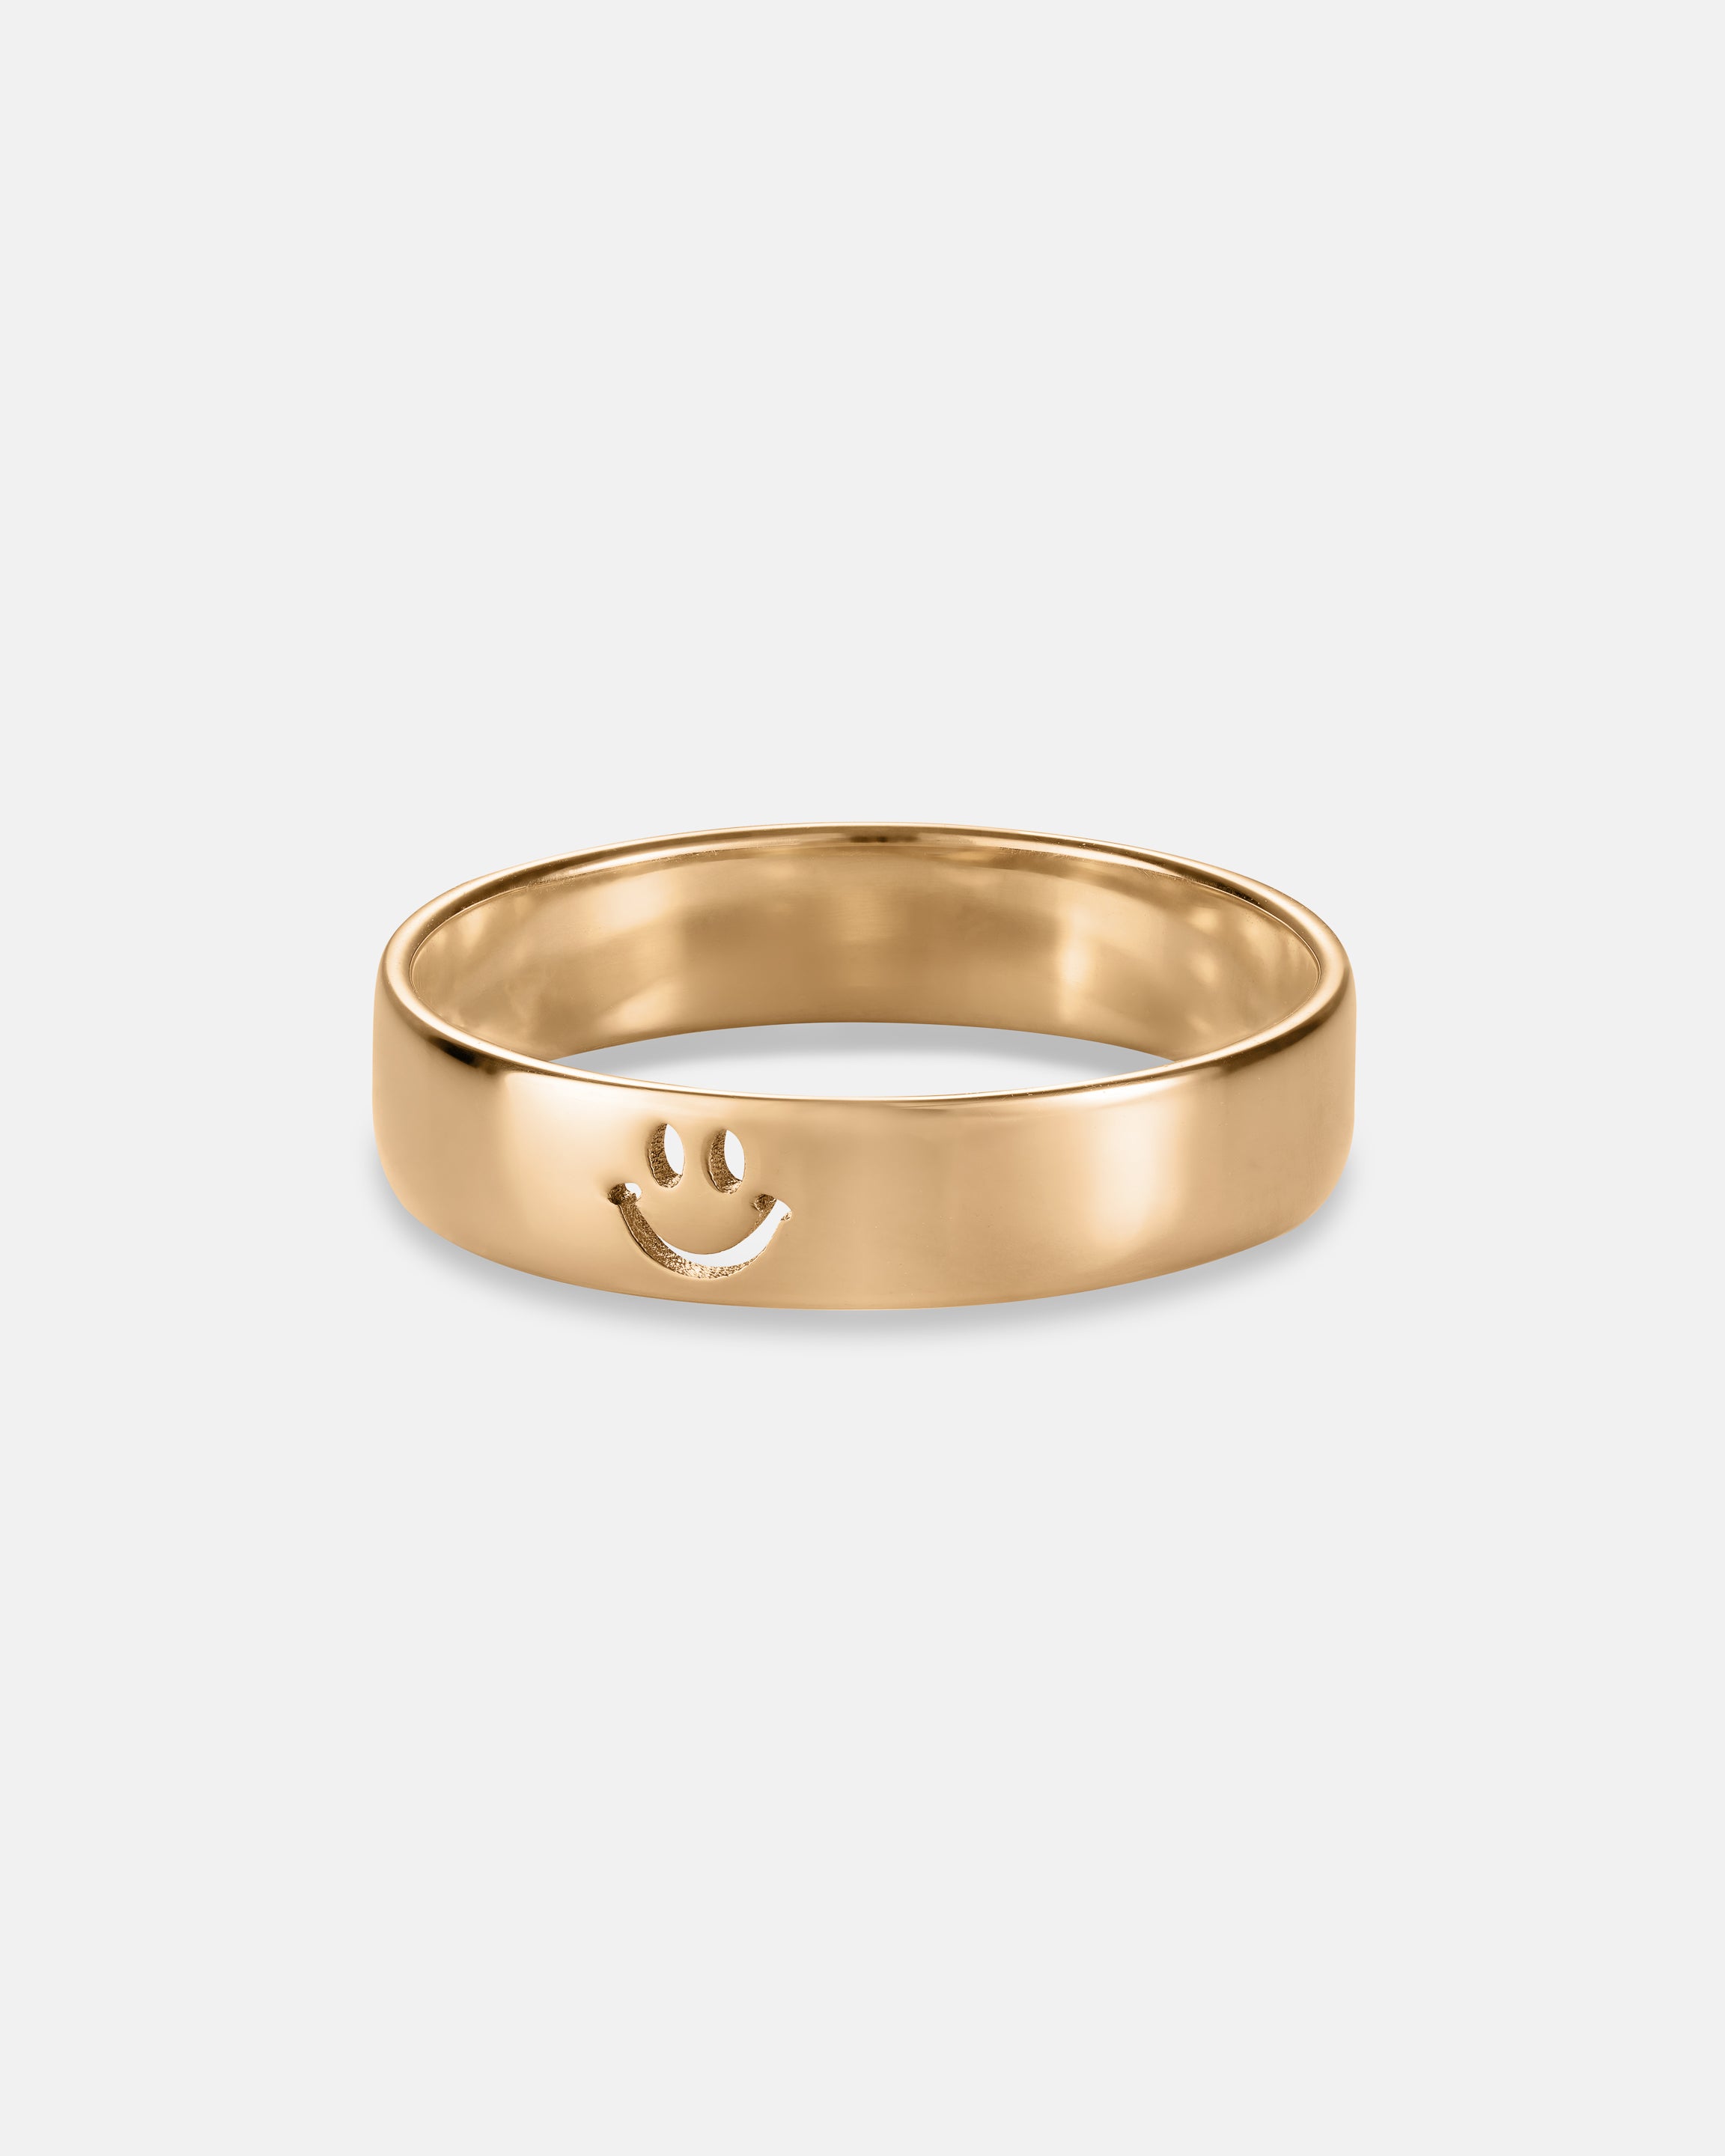 Smiley Ring – WILLIAM ÉDOUARD